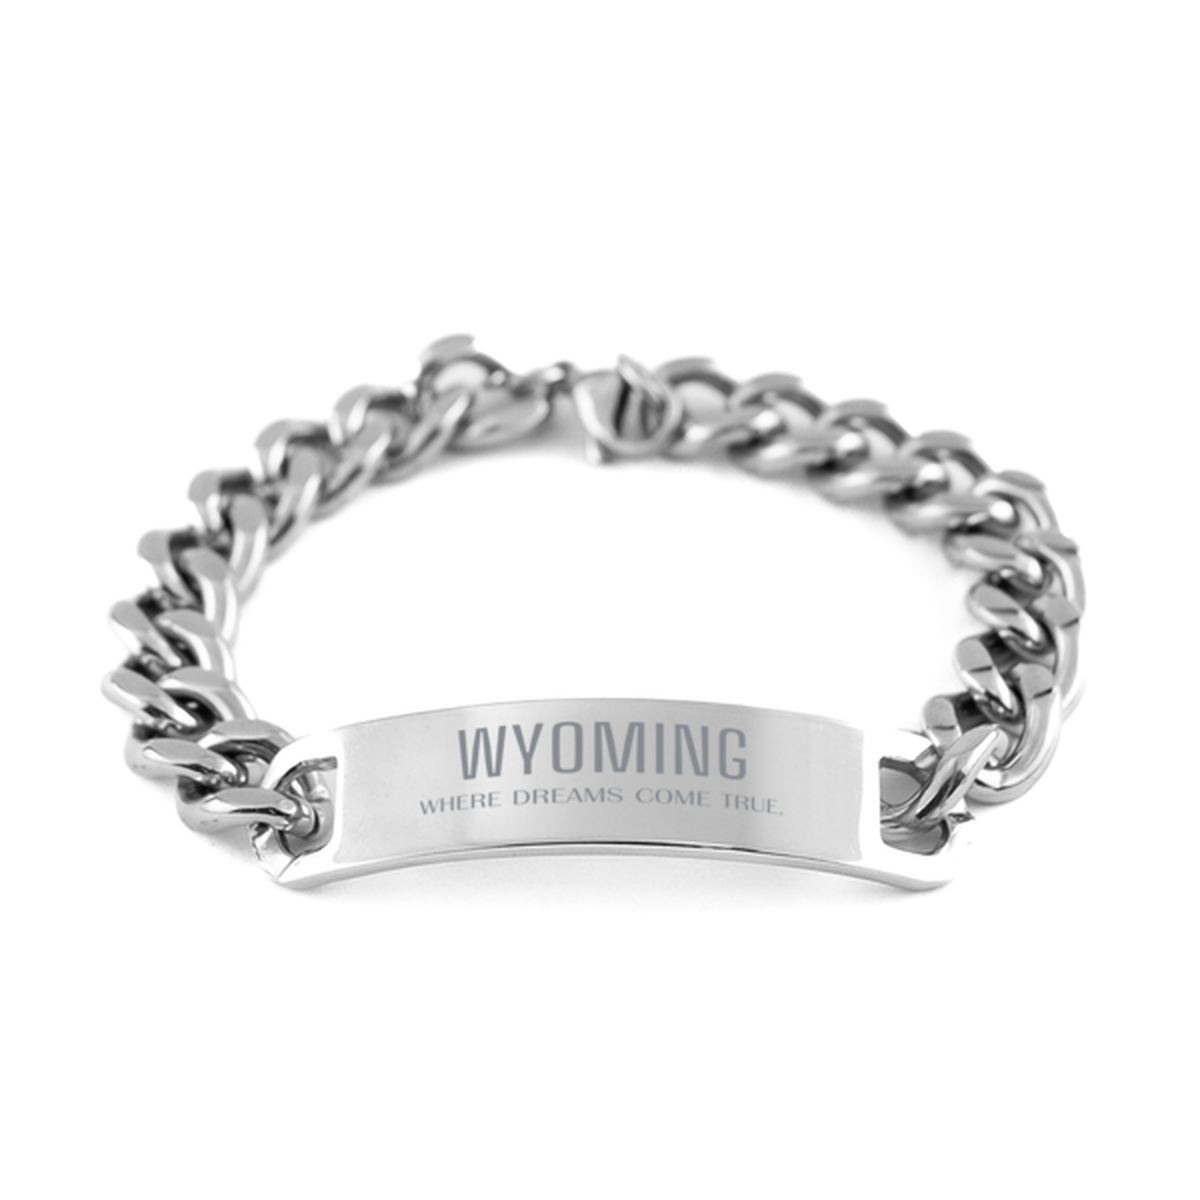 Love Wyoming State Cuban Chain Stainless Steel Bracelet, Wyoming Where dreams come true, Birthday Inspirational Gifts For Wyoming Men, Women, Friends